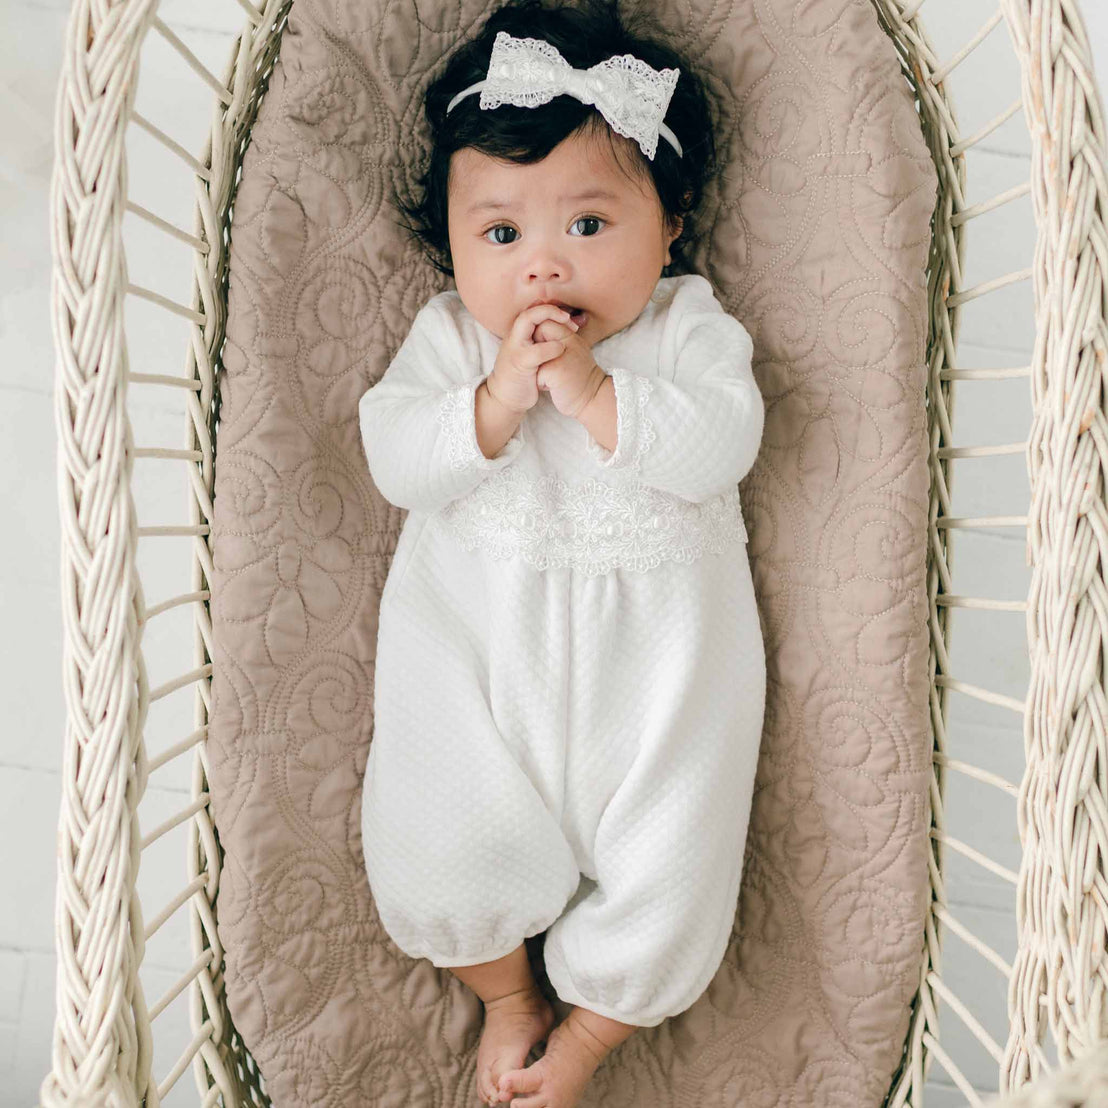 A baby wearing a Madeline Quilted Newborn Romper and a headband with a bow lies on a textured, quilted cotton surface inside a wicker crib. The baby has hands near the mouth and looks directly upwards.